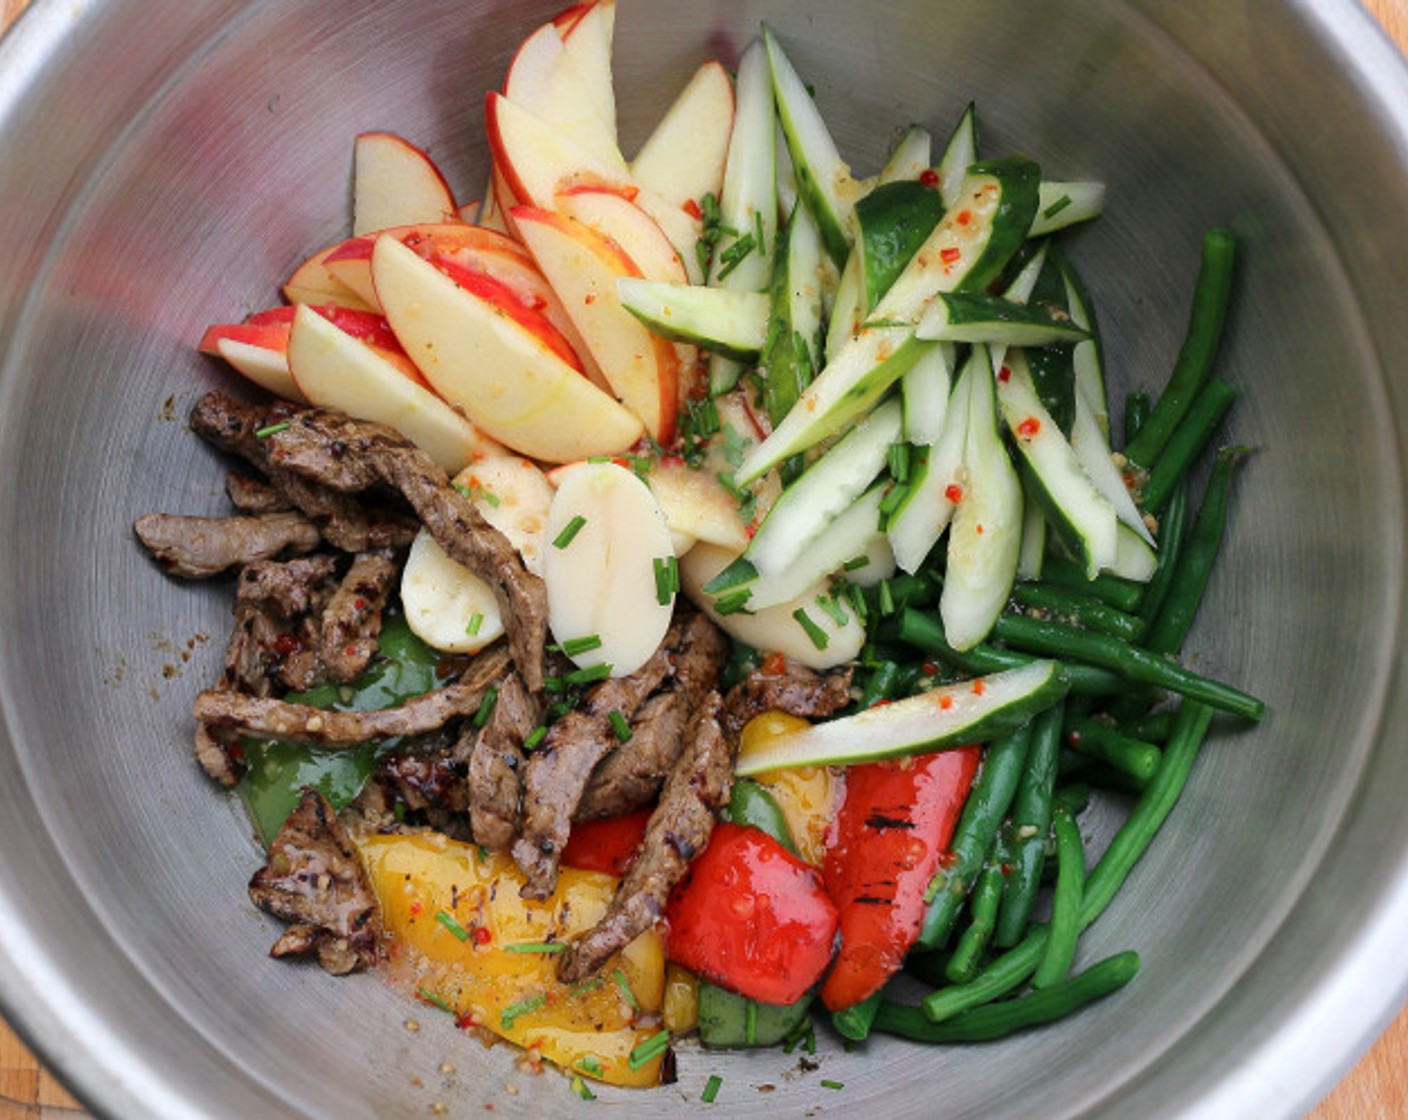 step 7 Mix the steak, apple, peppers, beans, and Cucumbers (2) with the Raspberry Vinaigrette (1 cup). Save a small amount of dressing to drizzle over the top.